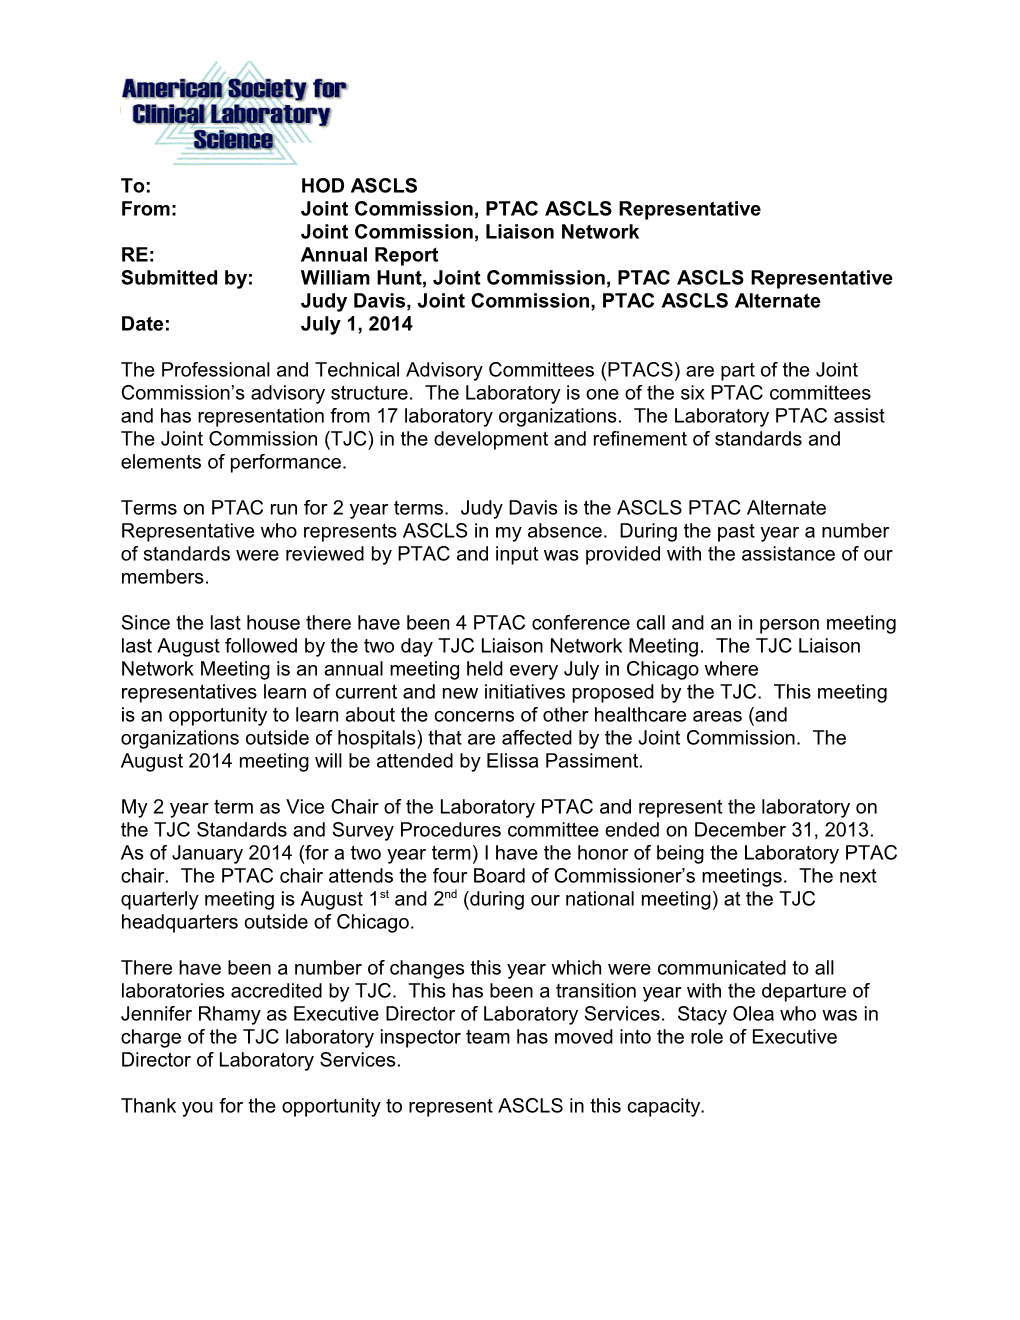 From: Joint Commission, PTAC ASCLS Representative